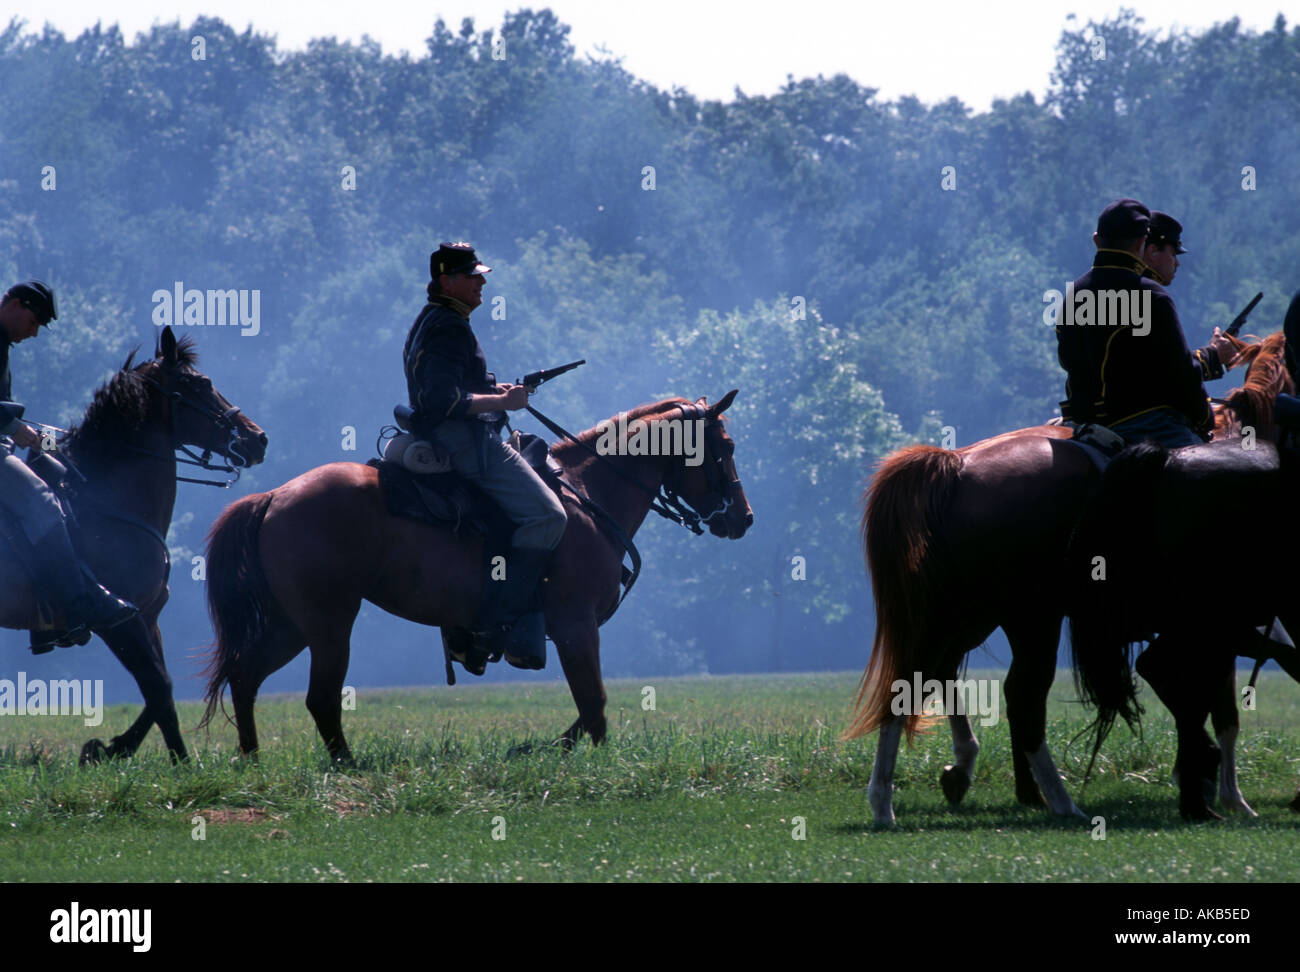 Magnificent horses silhouetted against a blue smoky forest as cavalry soldiers cross the open green fields of the battlefield Stock Photo